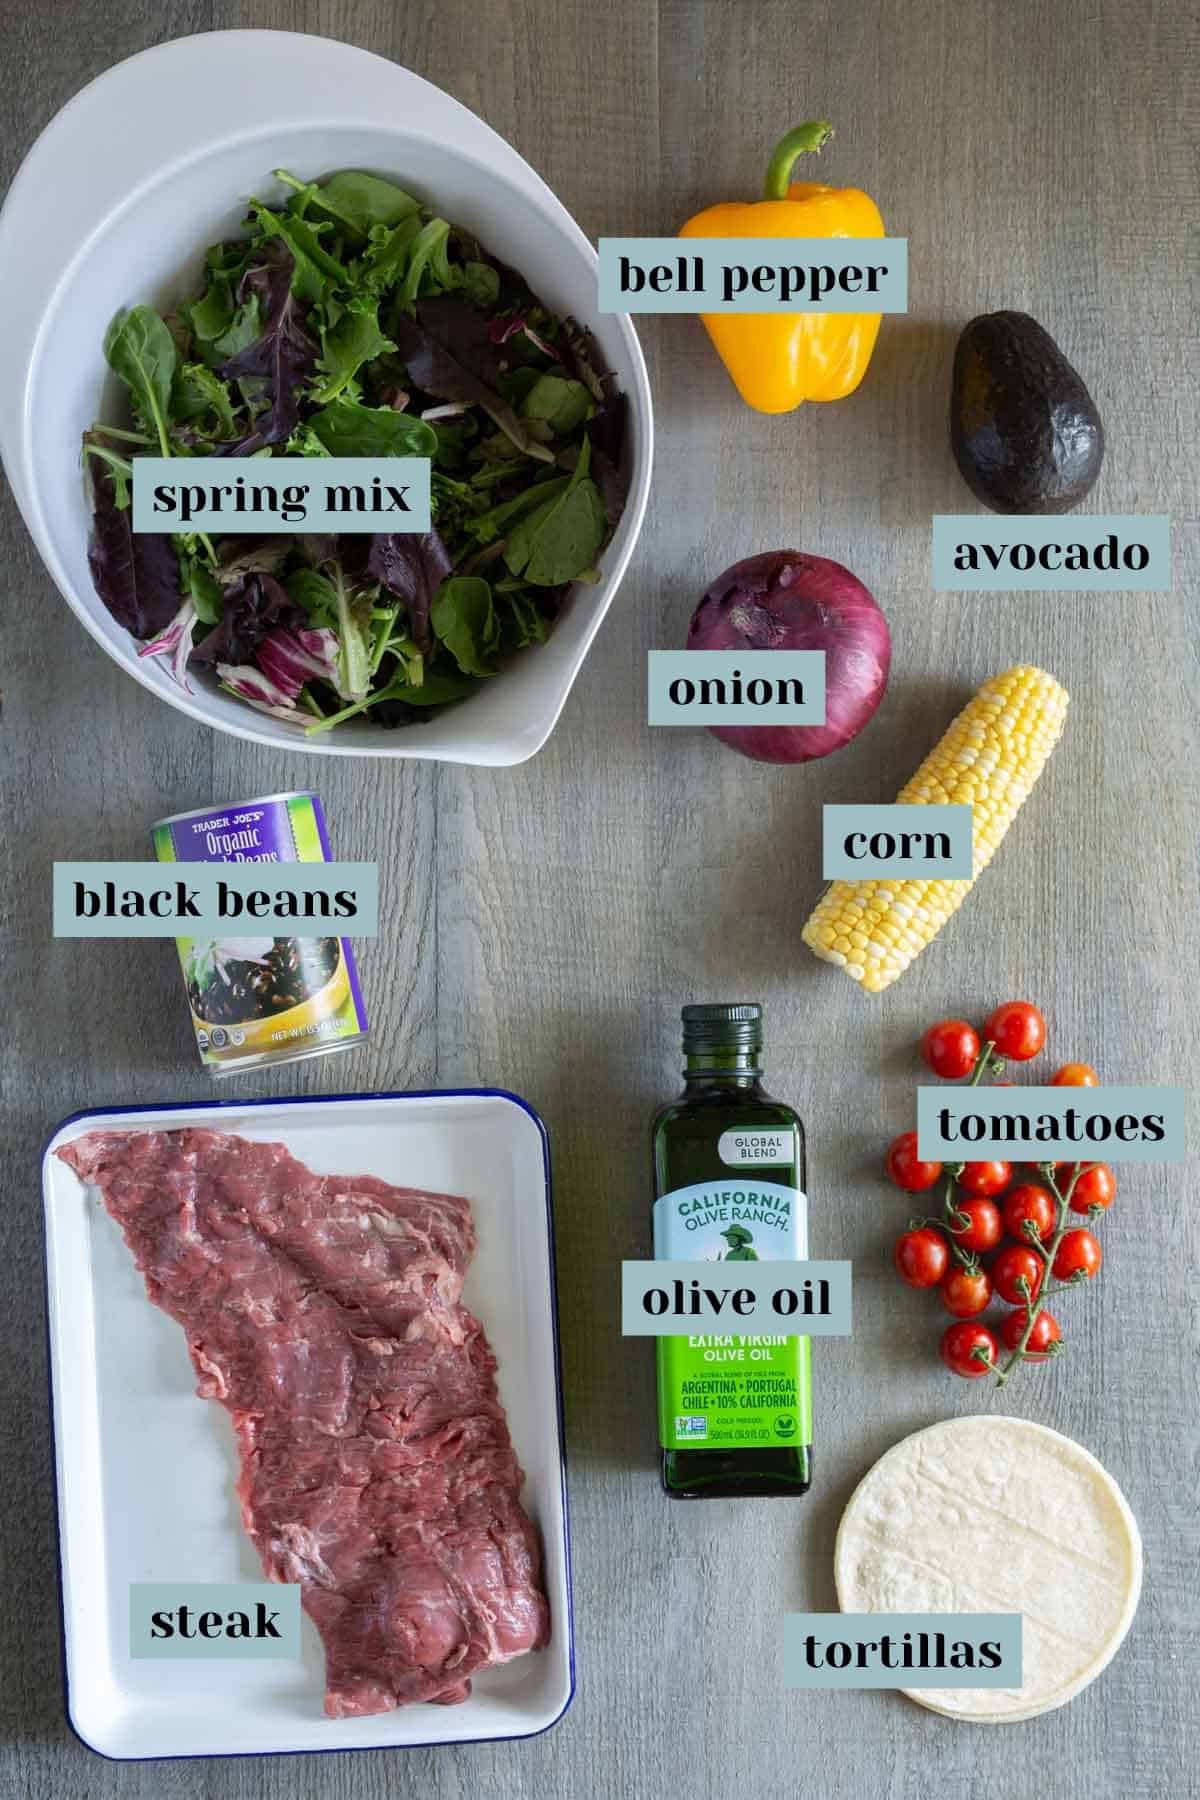 Ingredients for a meal are laid out, including spring mix, bell pepper, avocado, onion, corn, black beans, steak, olive oil, tomatoes, and tortillas on a gray surface.